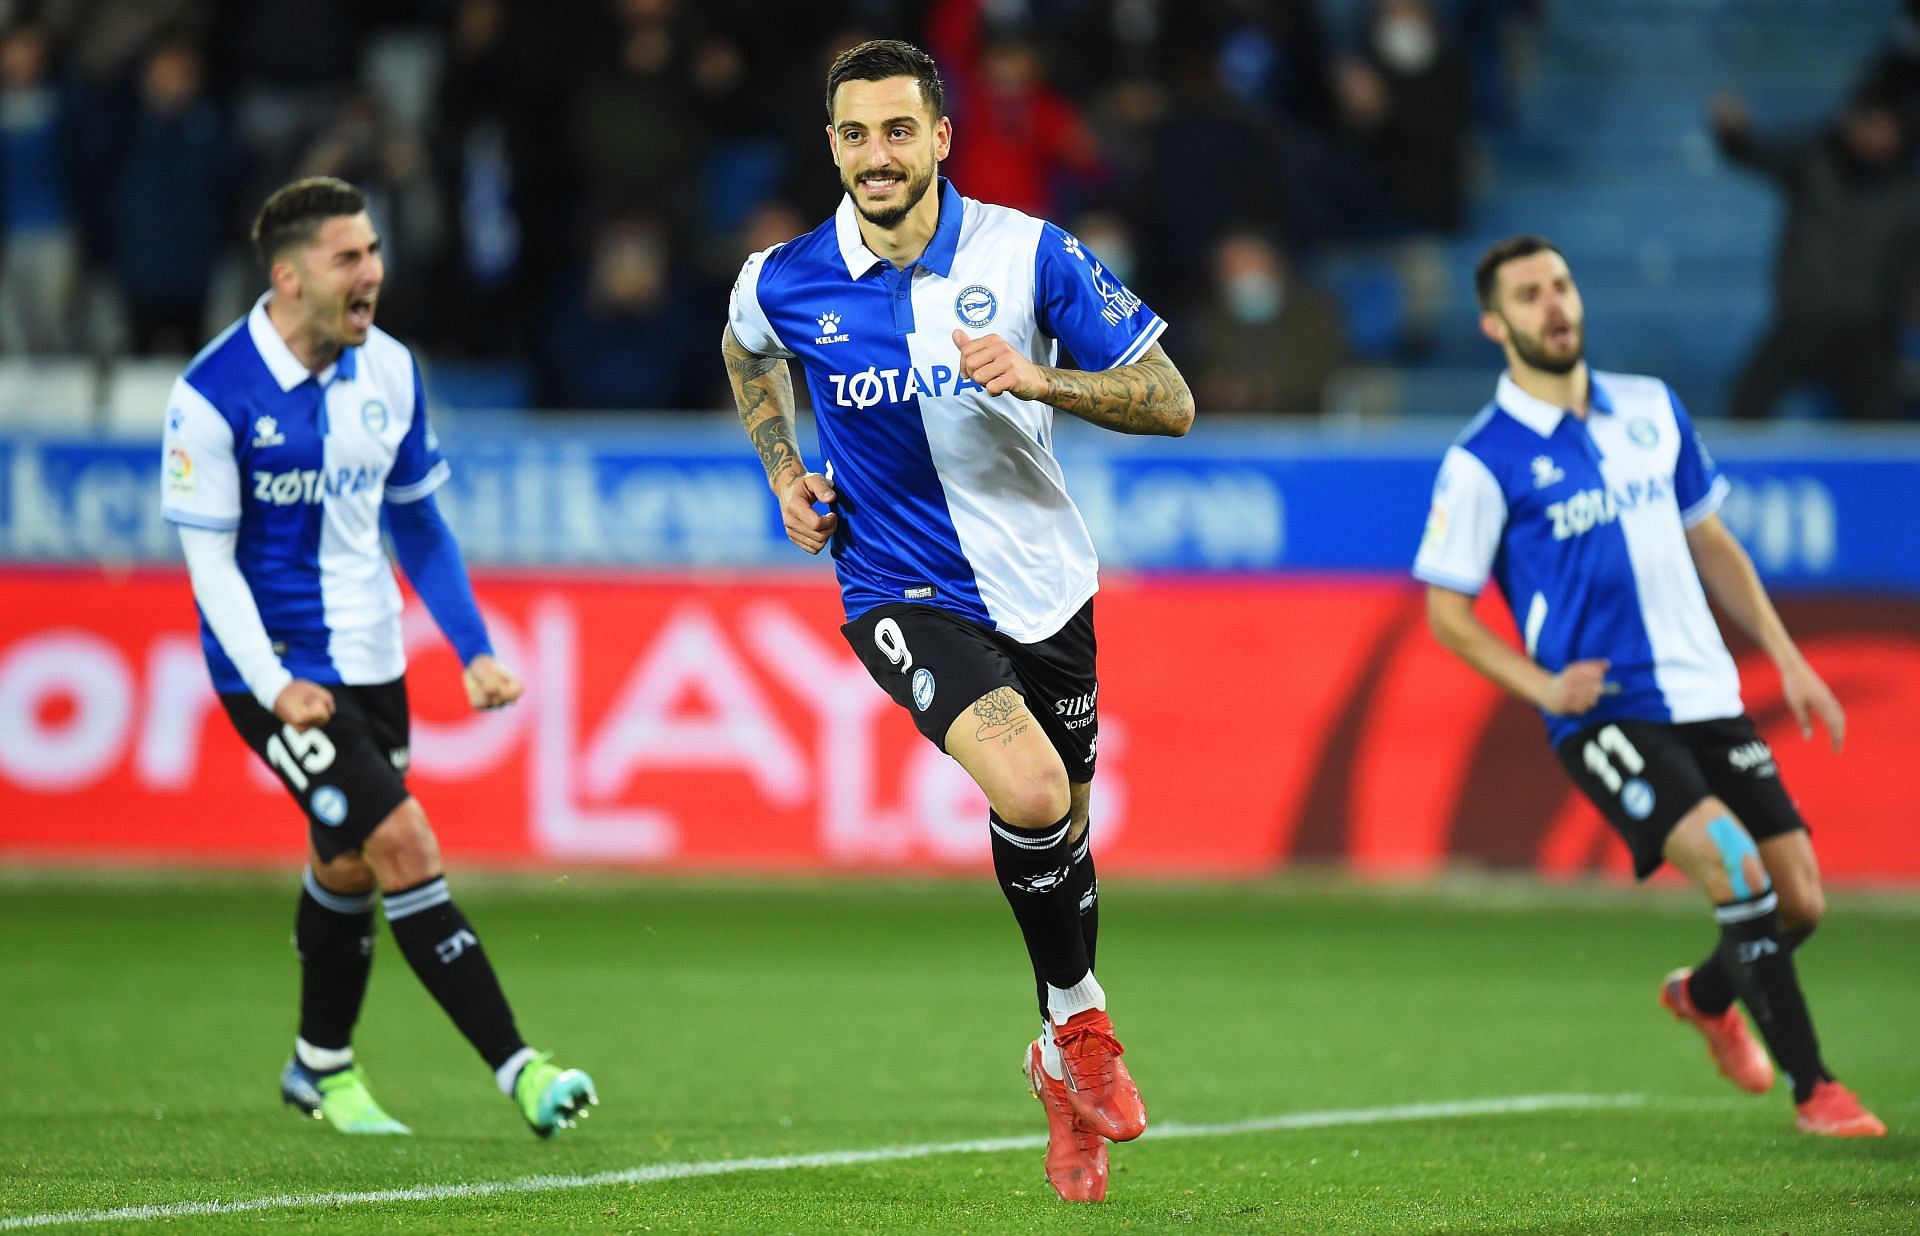 Leganes and Real Sociedad square off on Wednesday